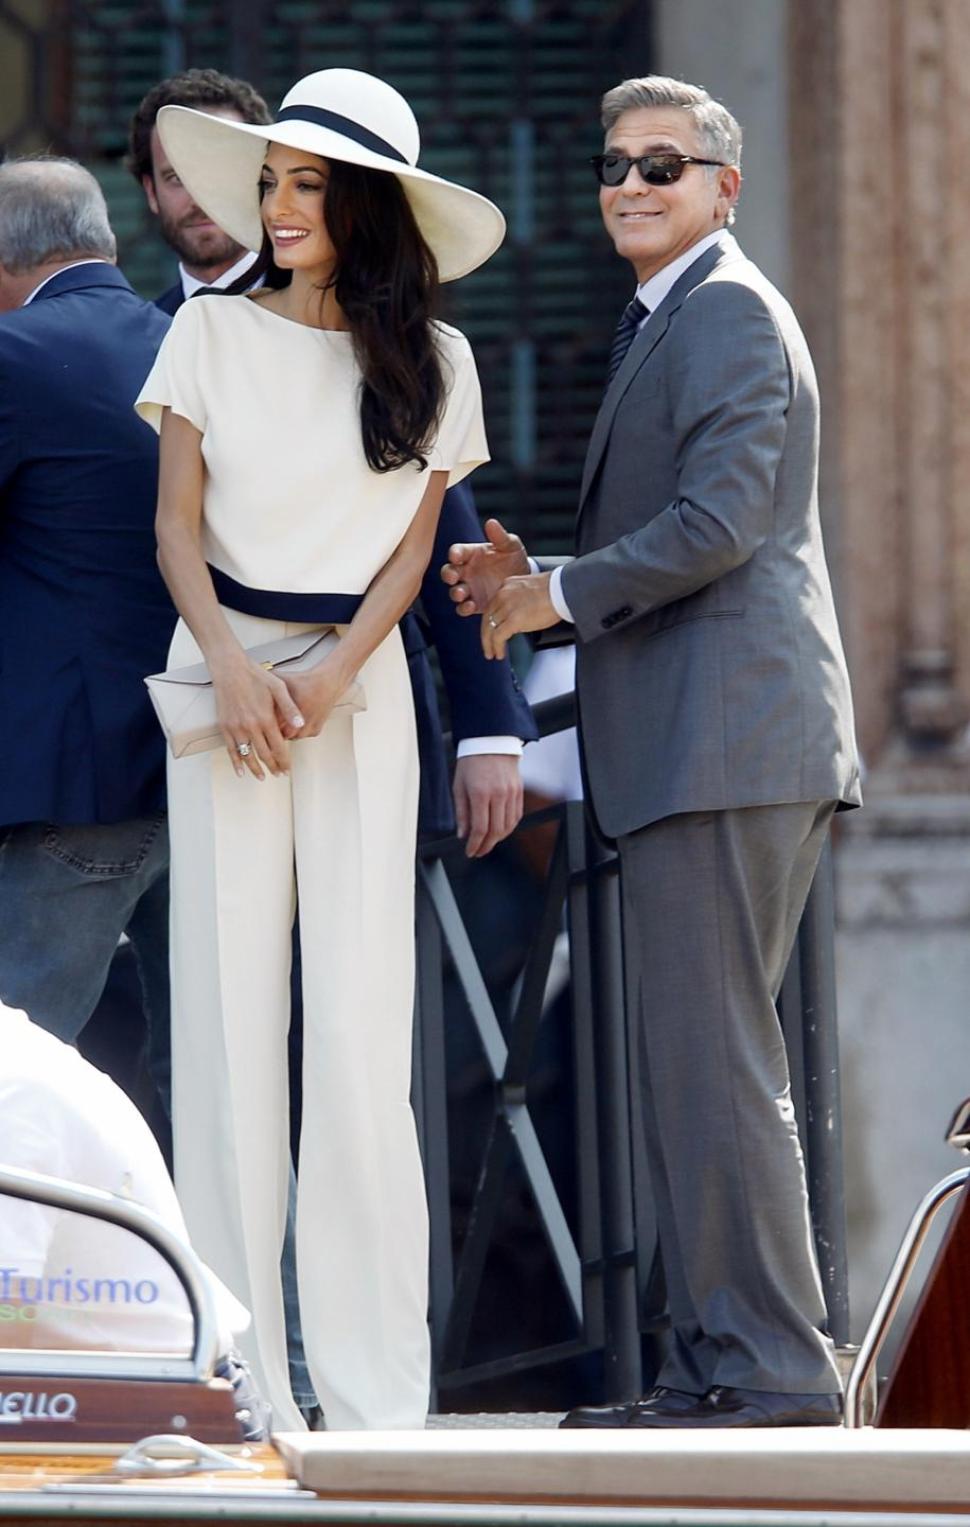 George Clooney and his wife Amal Alamuddin in Venice on Monday, Sept. 29.